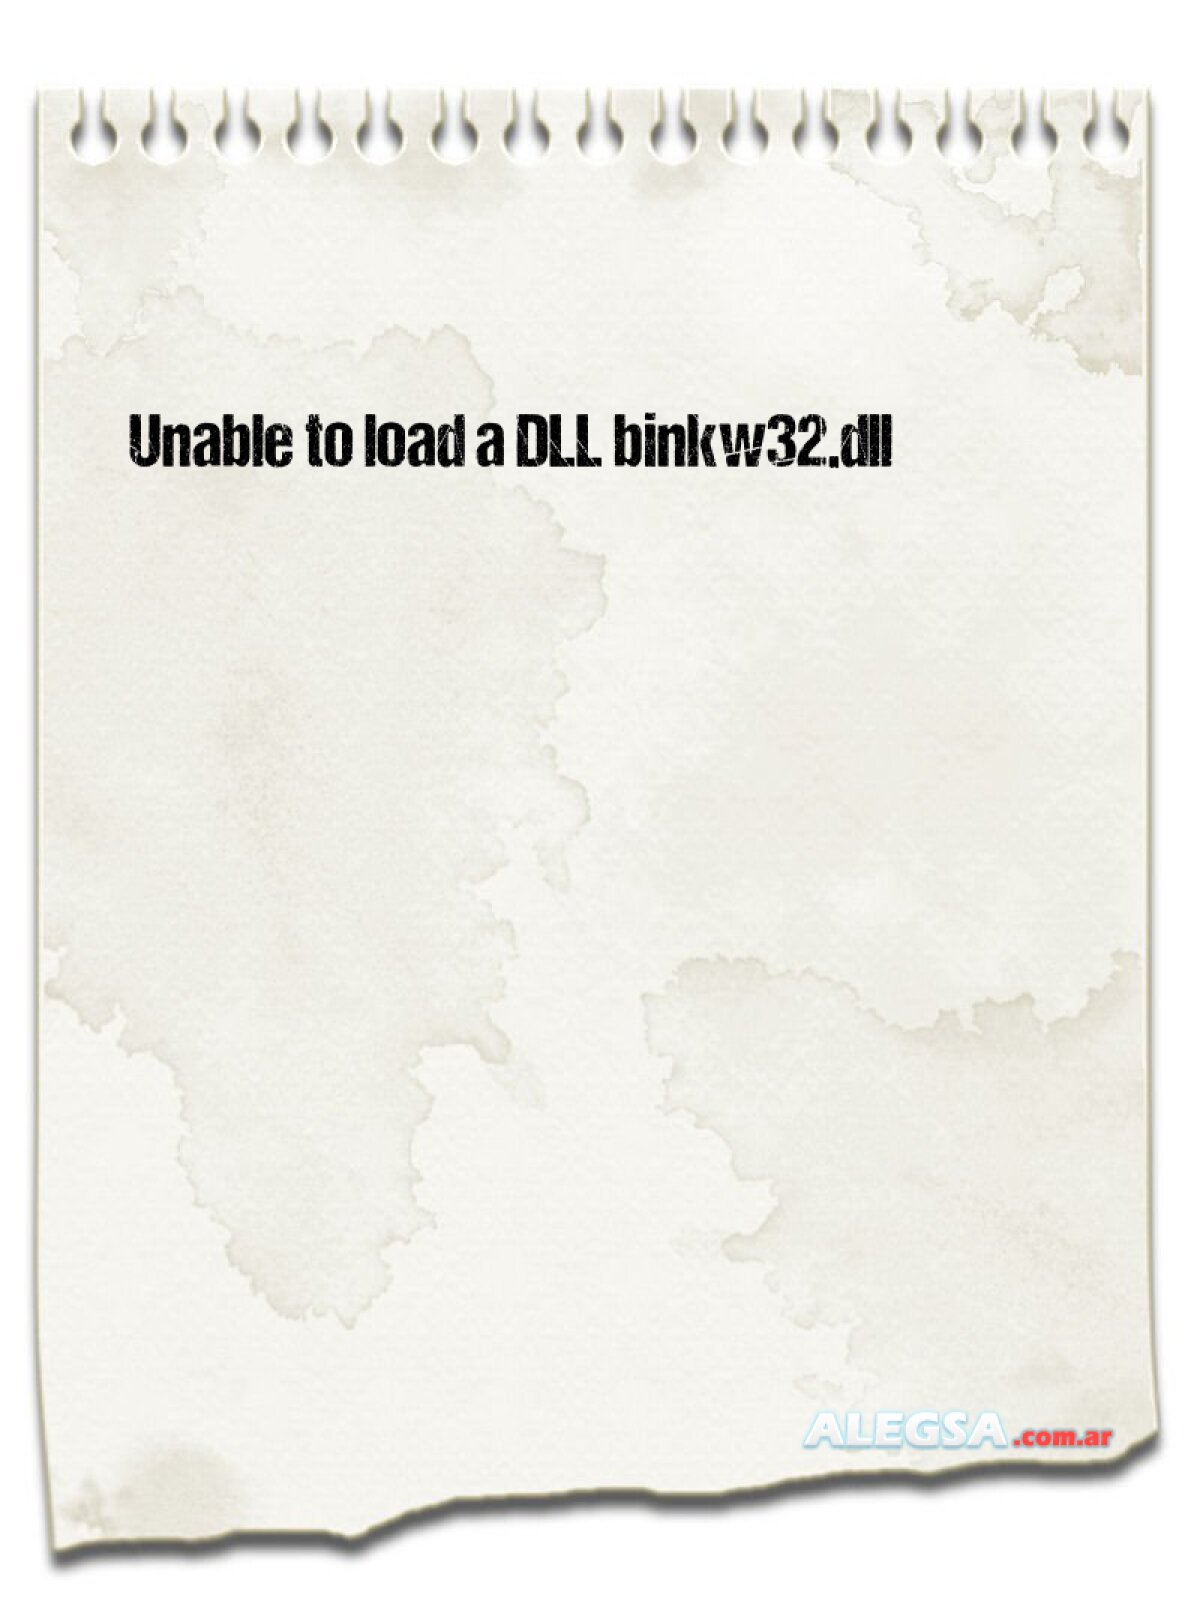 Unable to load a DLL binkw32.dll